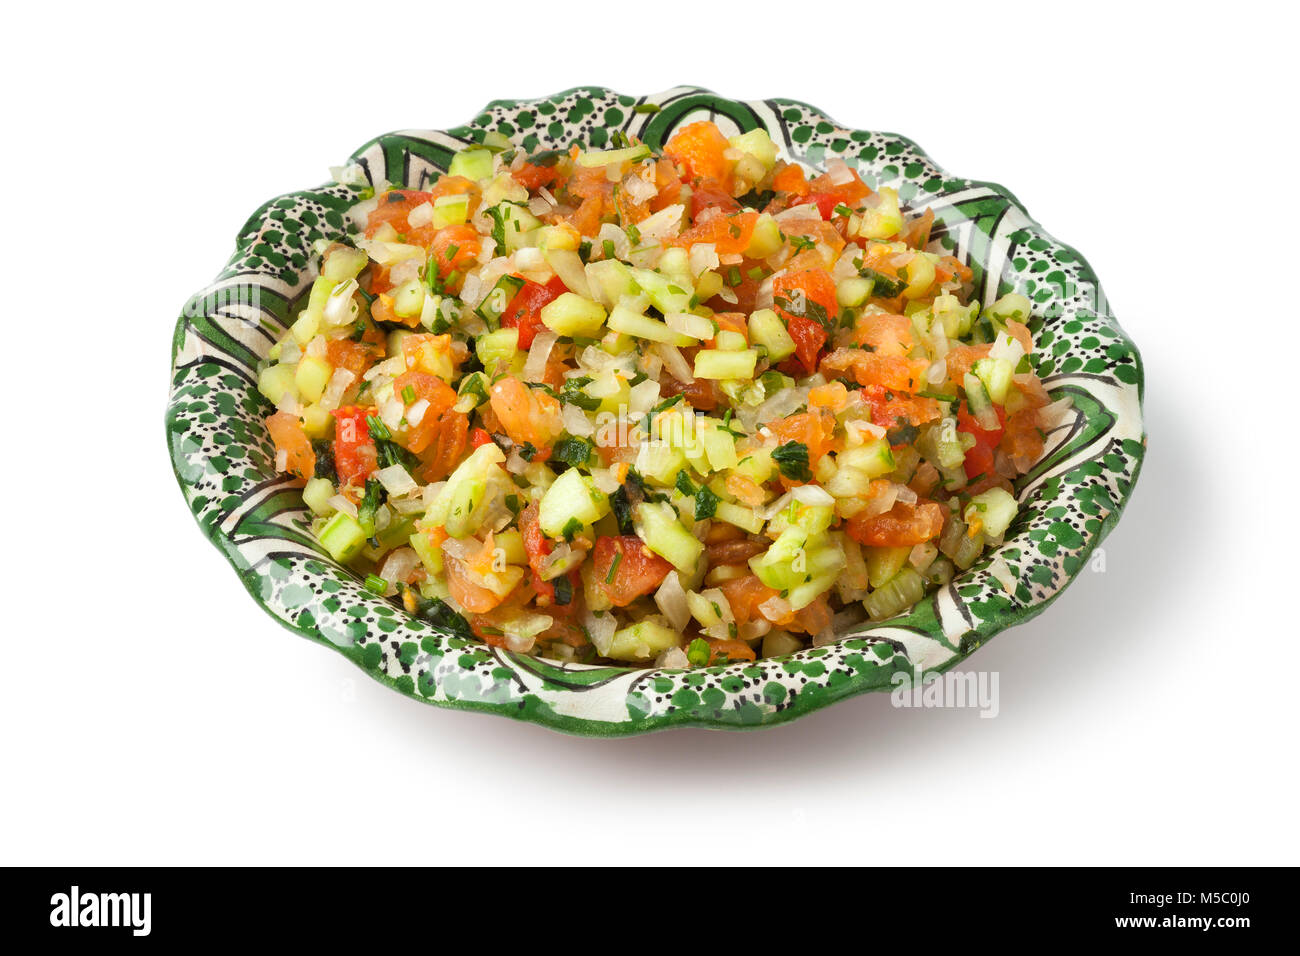 Moroccan dish with mixed vegetable salad and herbs isolated on white background Stock Photo